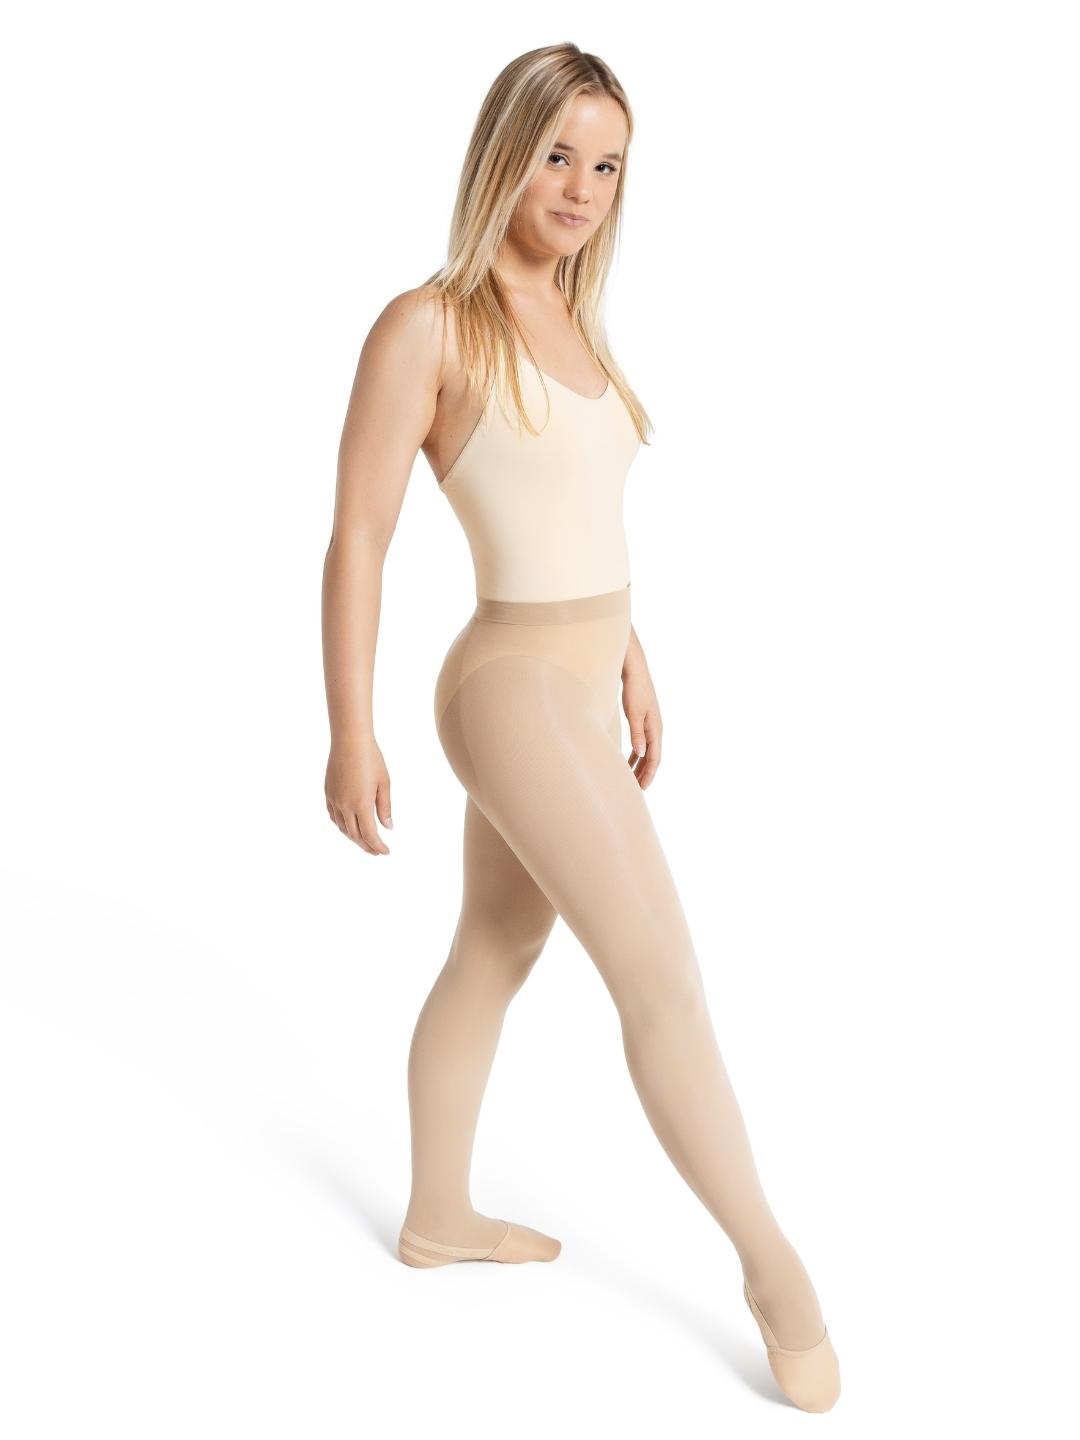  Capezio Girls Ultra Soft Self Knit Waistband Tight,Toasted  Almond, One Size